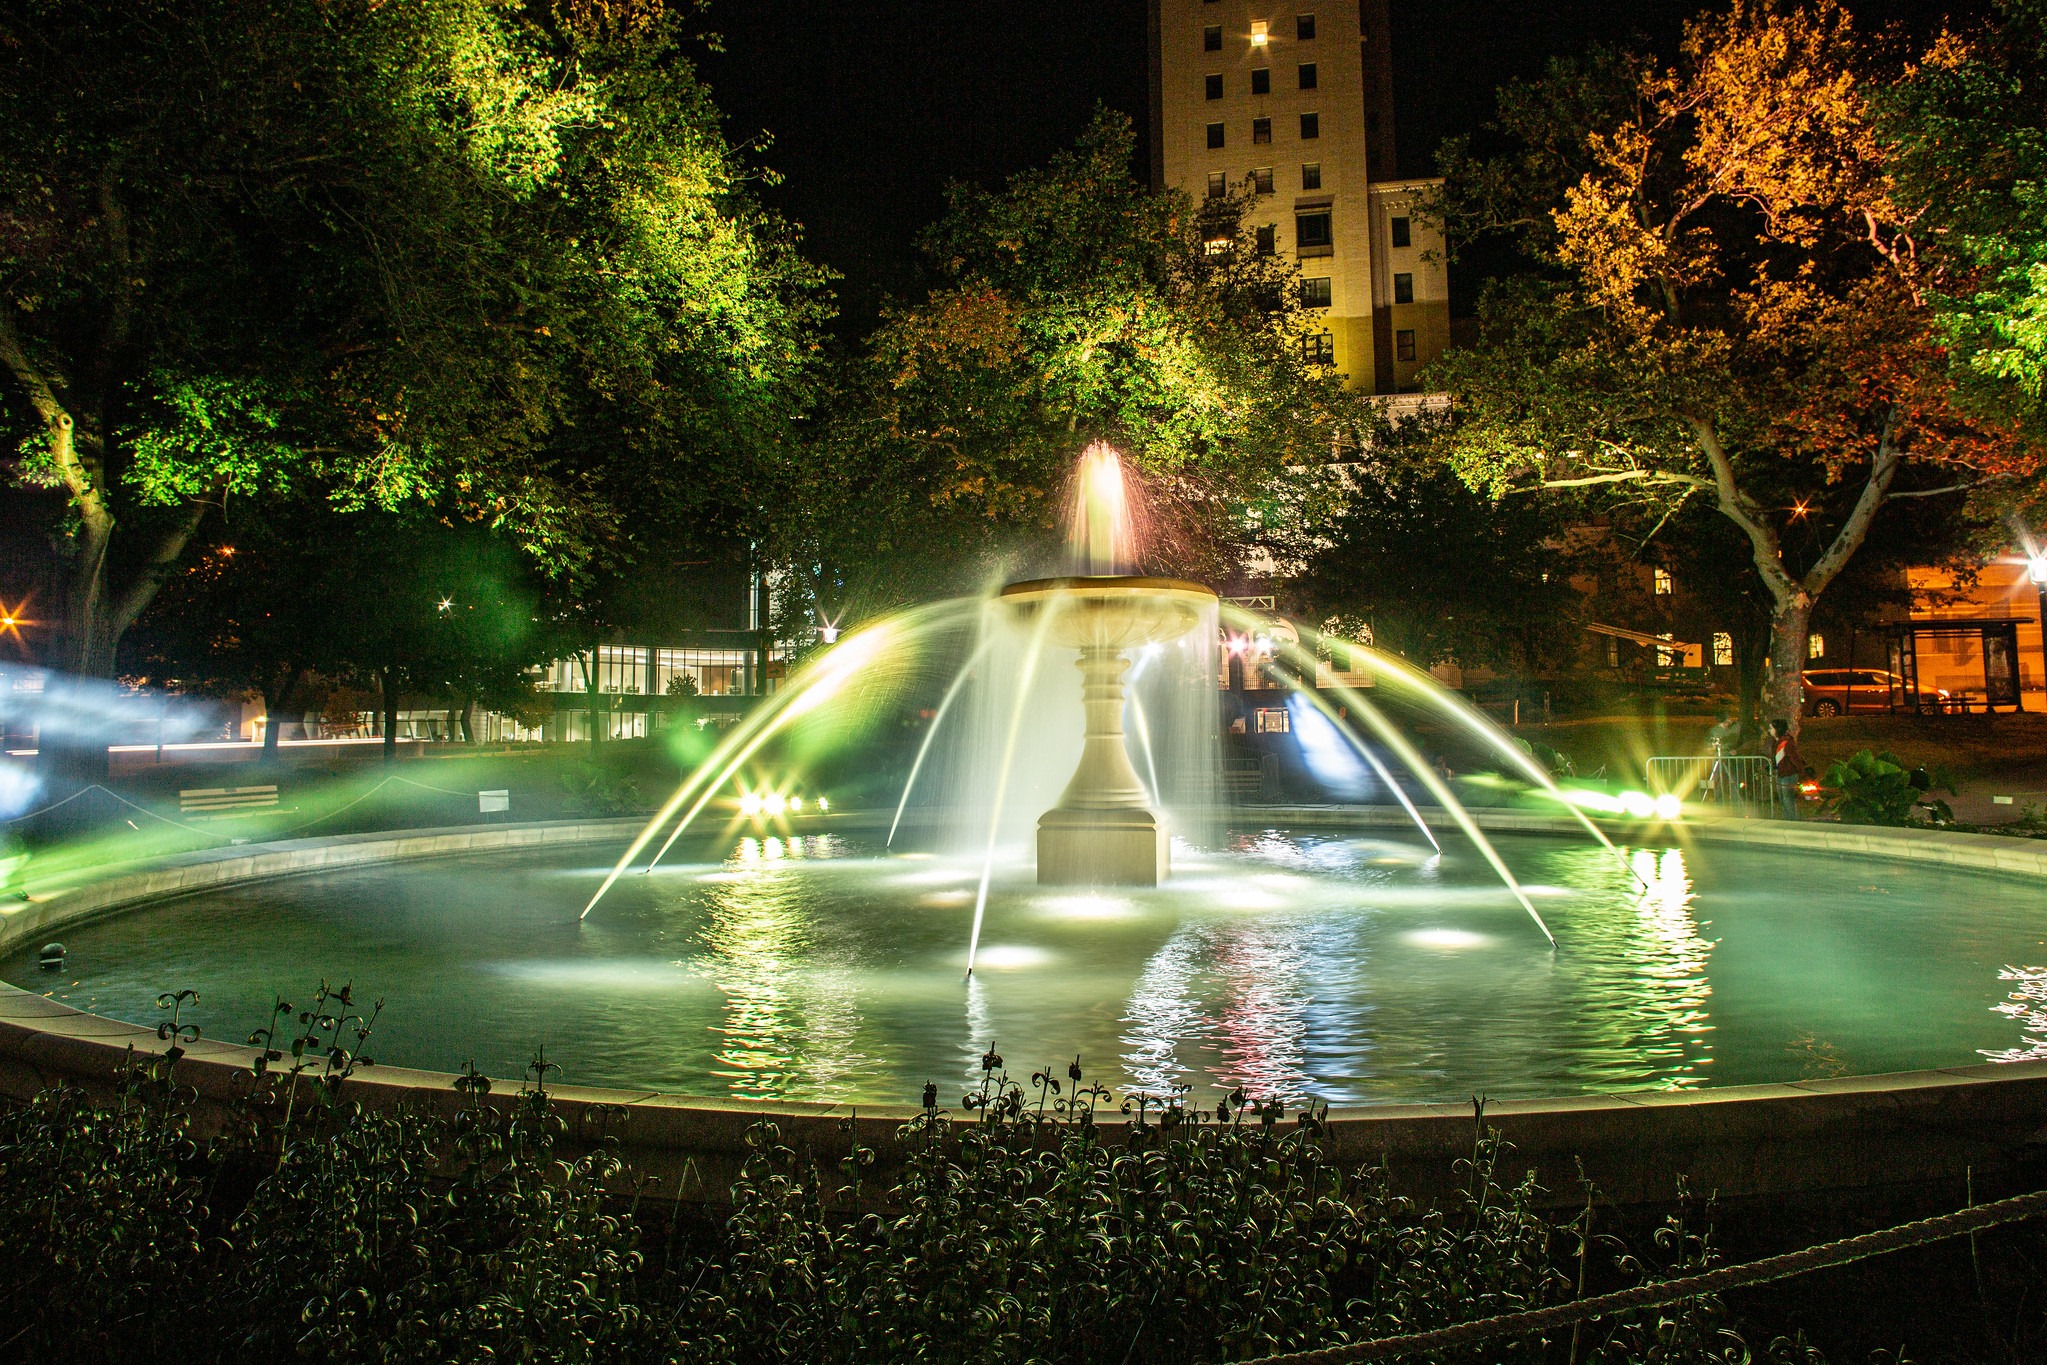 The Rooney Memorial Fountain illuminated in the evening.